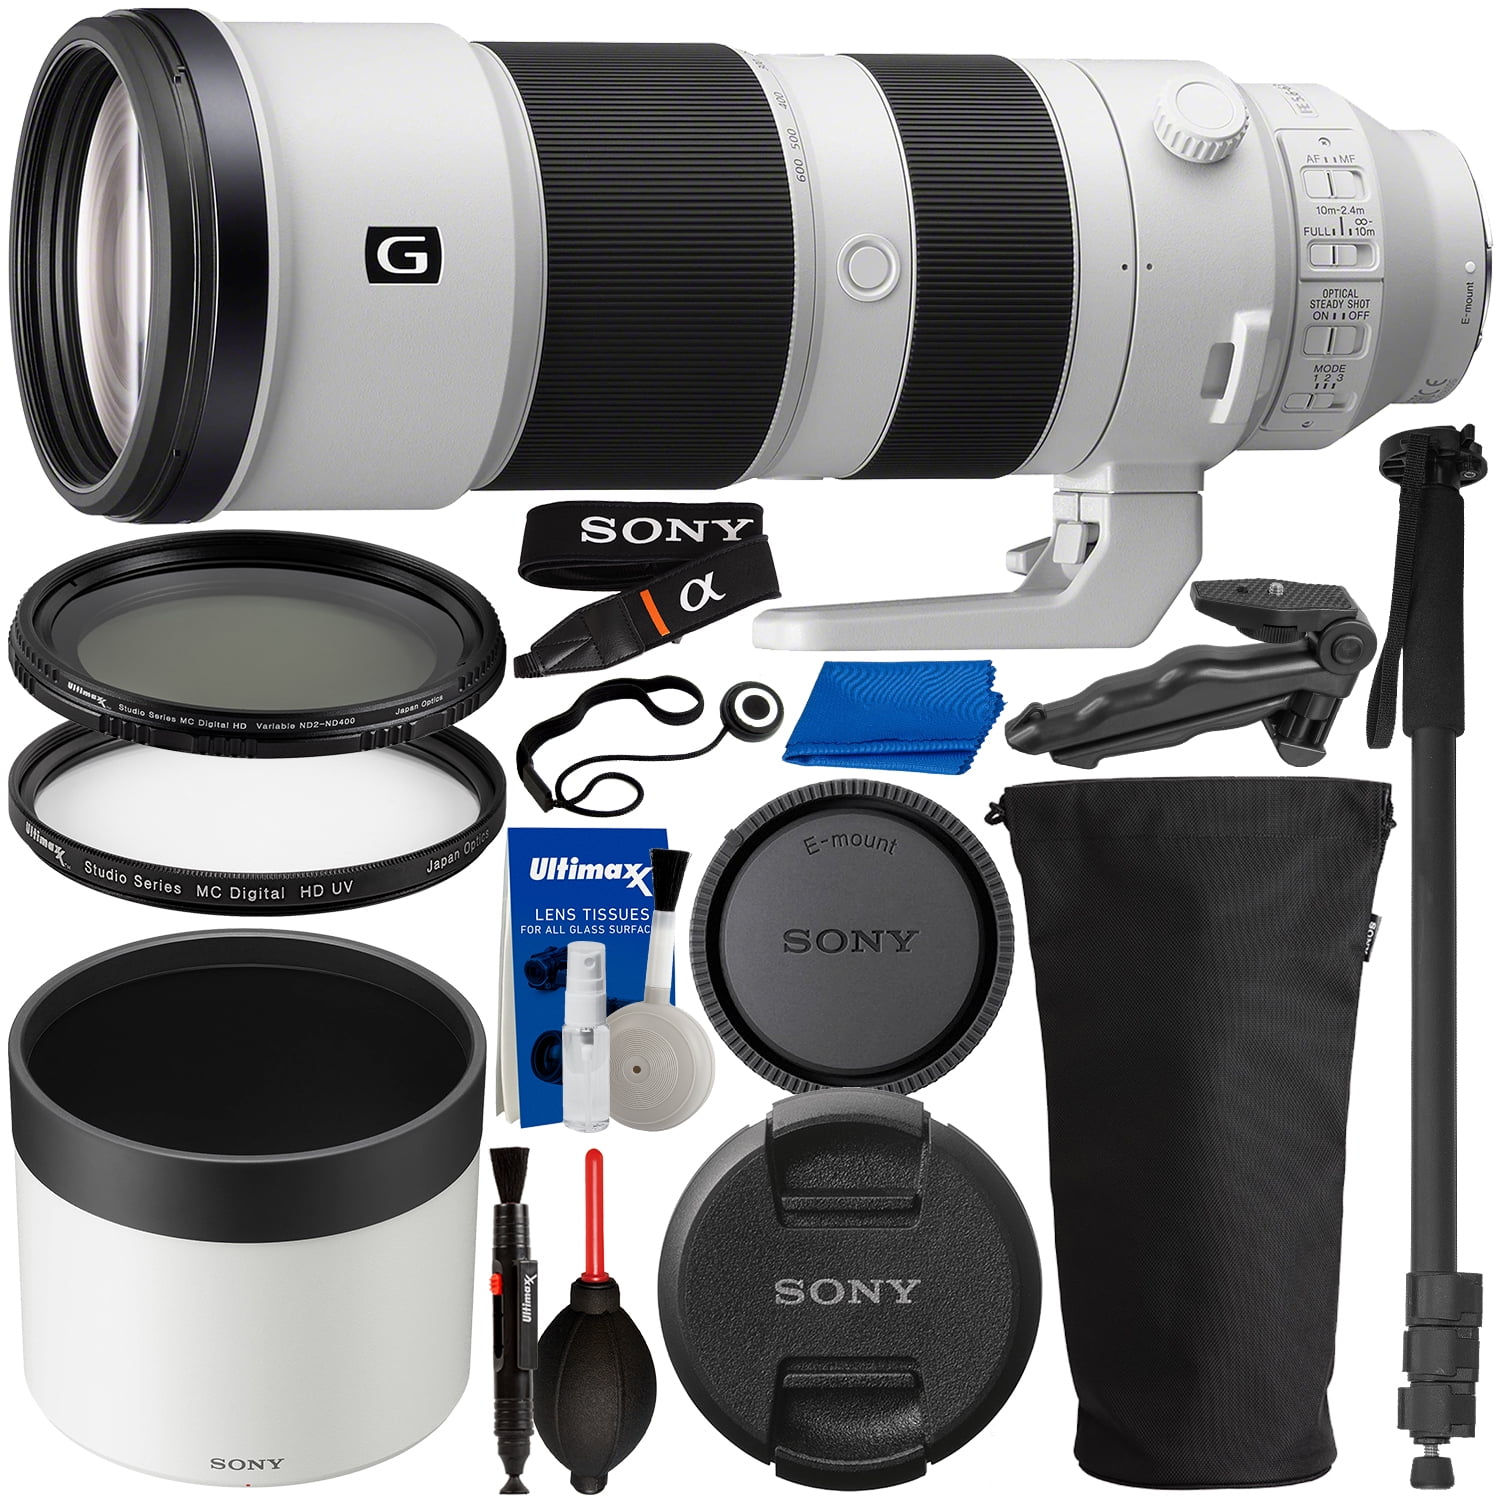  Sony FE 200-600mm f/5.6-6.3 G OSS Lens with Accessory Bundle  (Filter Kit, Cleaning Pen, 50 Tripod and More) SEL200600G : Electronics